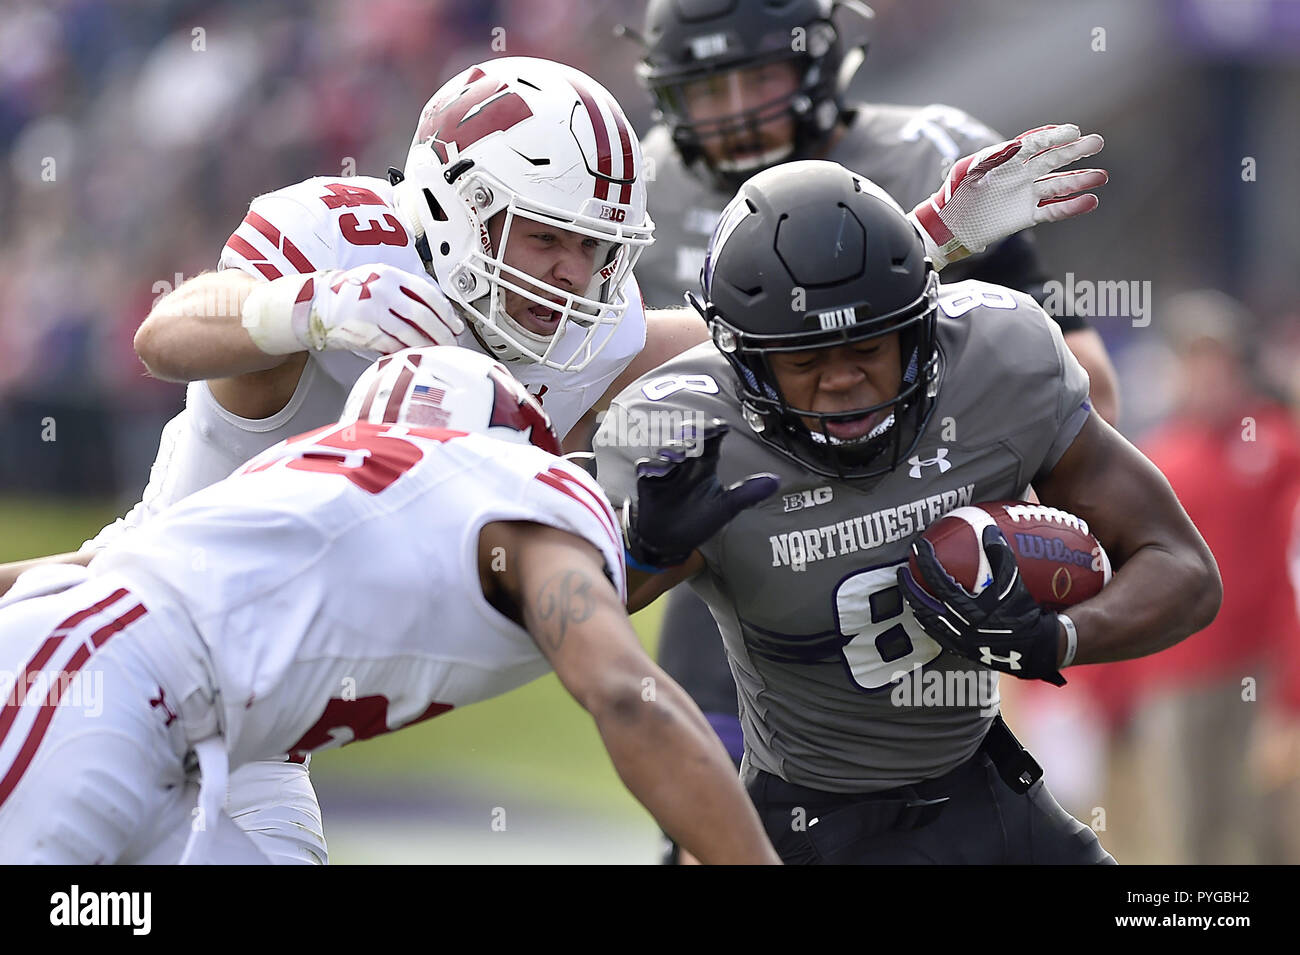 Evanston, Illinois, USA. 27th Oct, 2018. Northwestern Wildcats wide receiver Kyric McGowan (8) is tackled by Wisconsin Badgers linebacker Ryan Connelly (43) and Wisconsin Badgers safety Eric Burrell (25) in the first half. Credit: Quinn Harris/ZUMA Wire/Alamy Live News Stock Photo